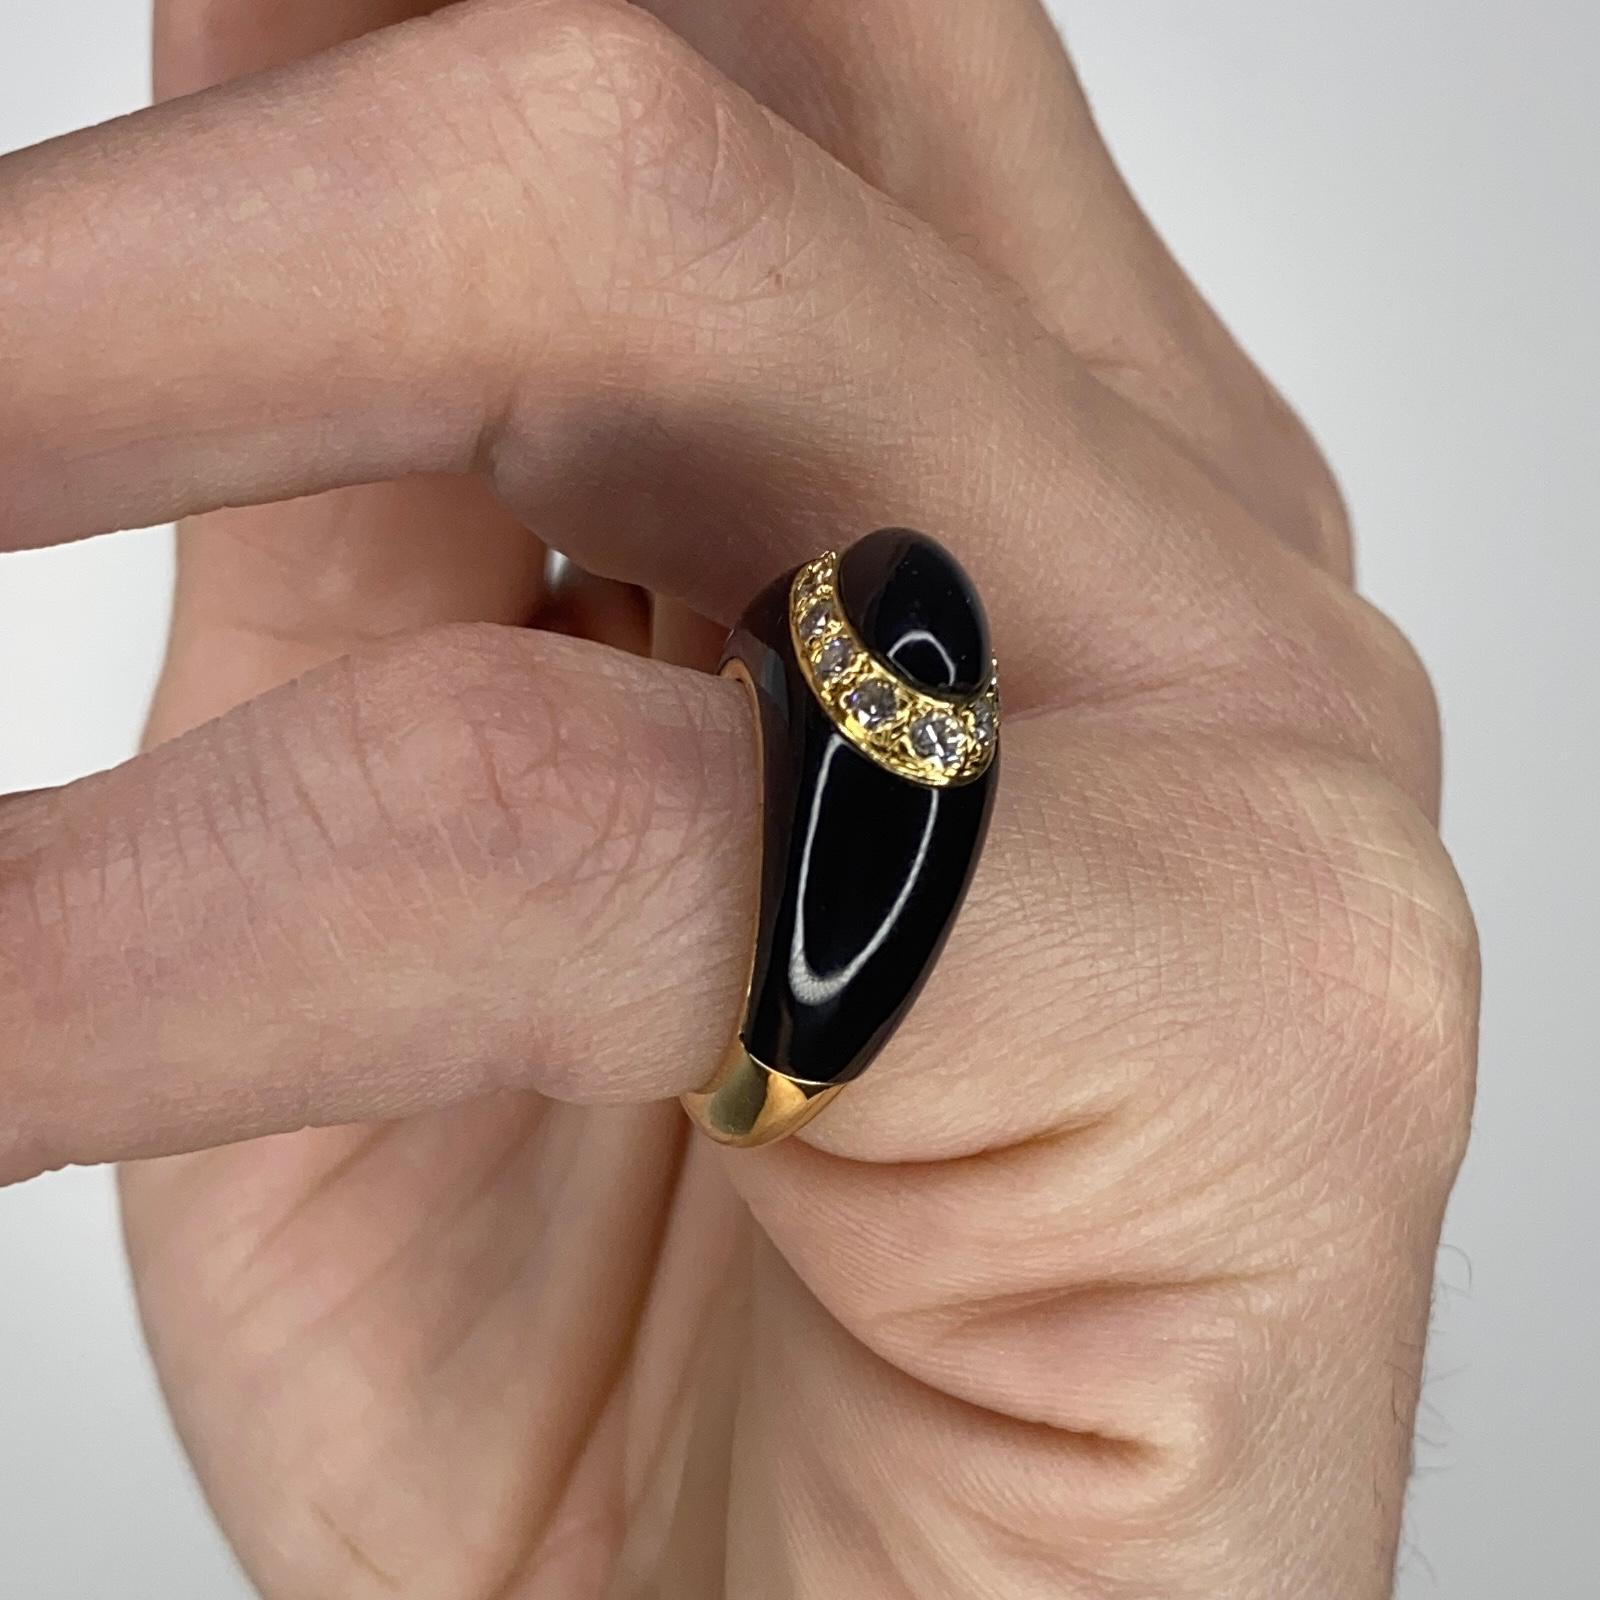 Van Cleef & Arpels 1970 Paris Onyx Bombe Ring in 18Kt Yellow Gold with Diamonds 2